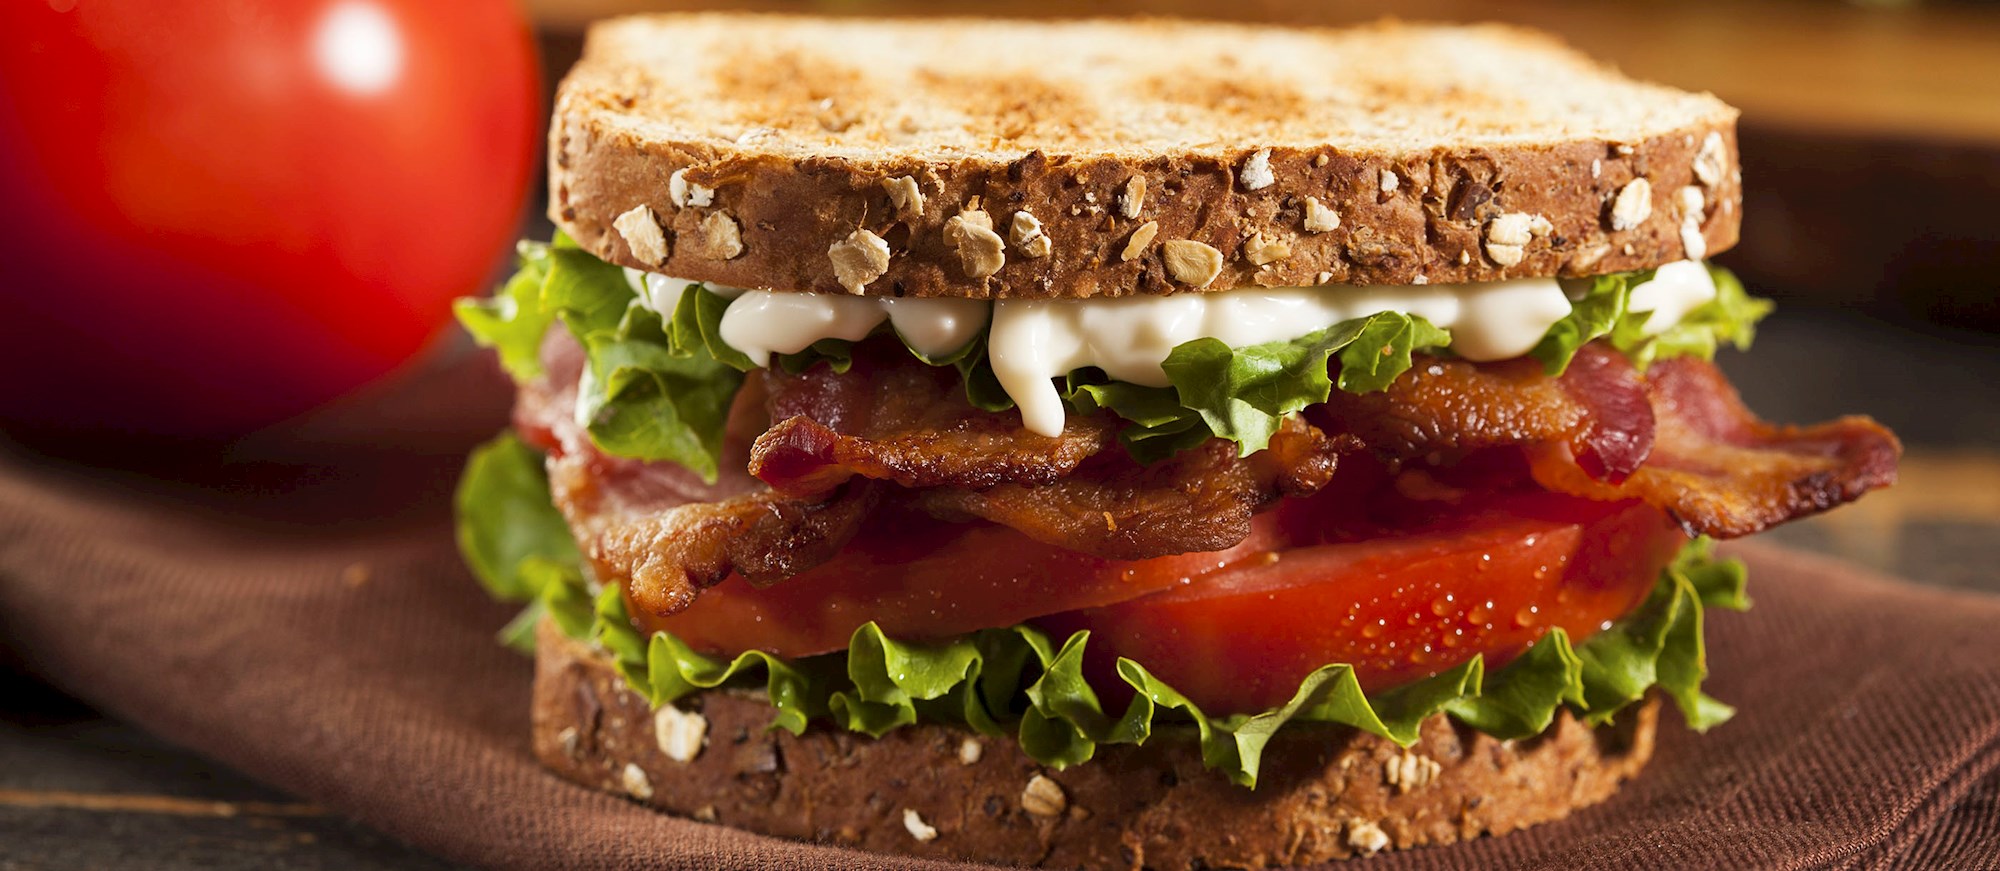 Where to Eat the Best BLT Sandwich in the United States of America